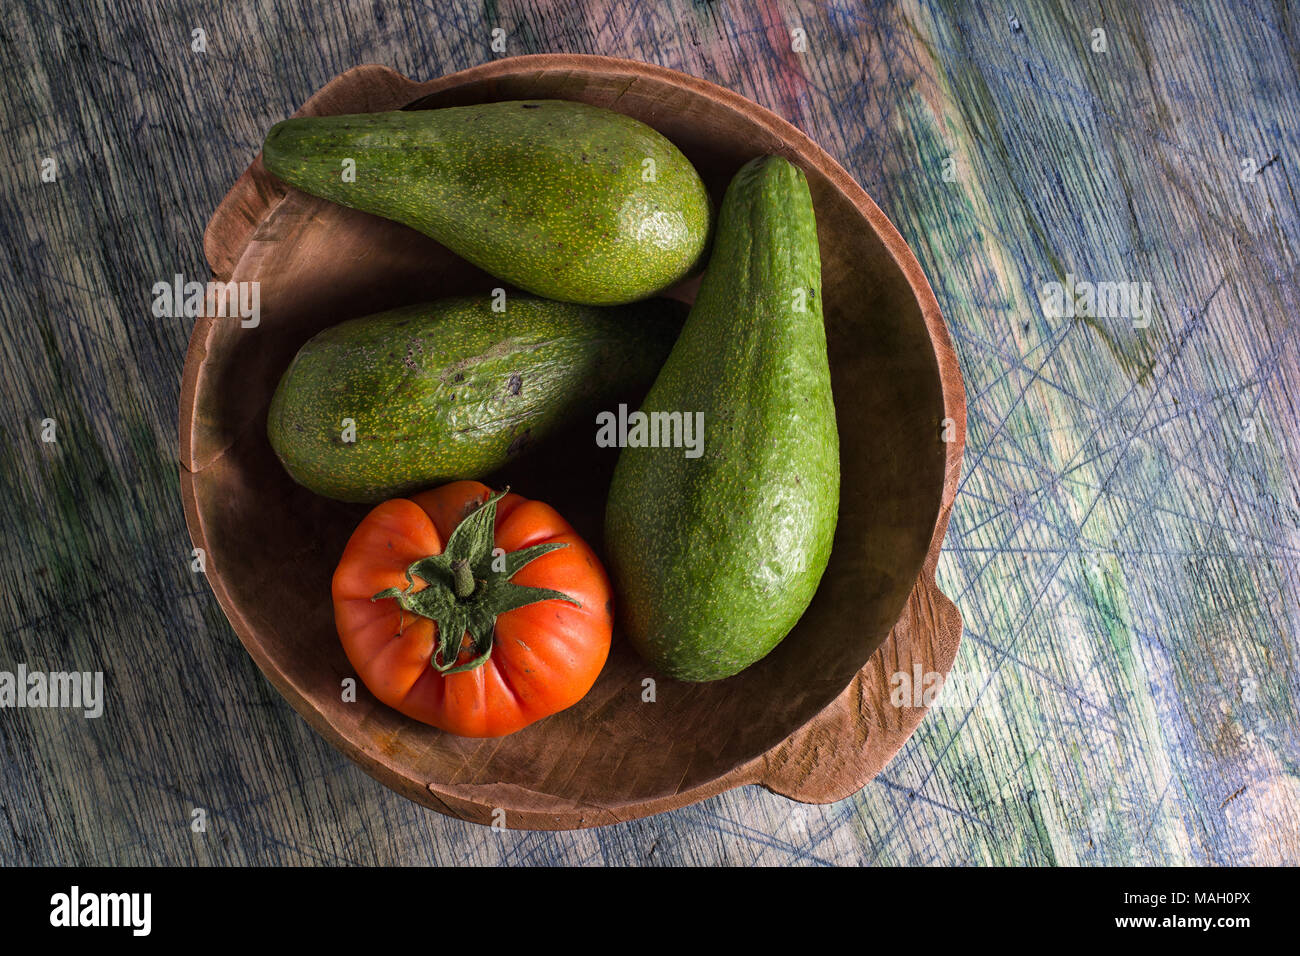 closeup of  avocado variety and heirloom tomato in a wooden bowl Stock Photo